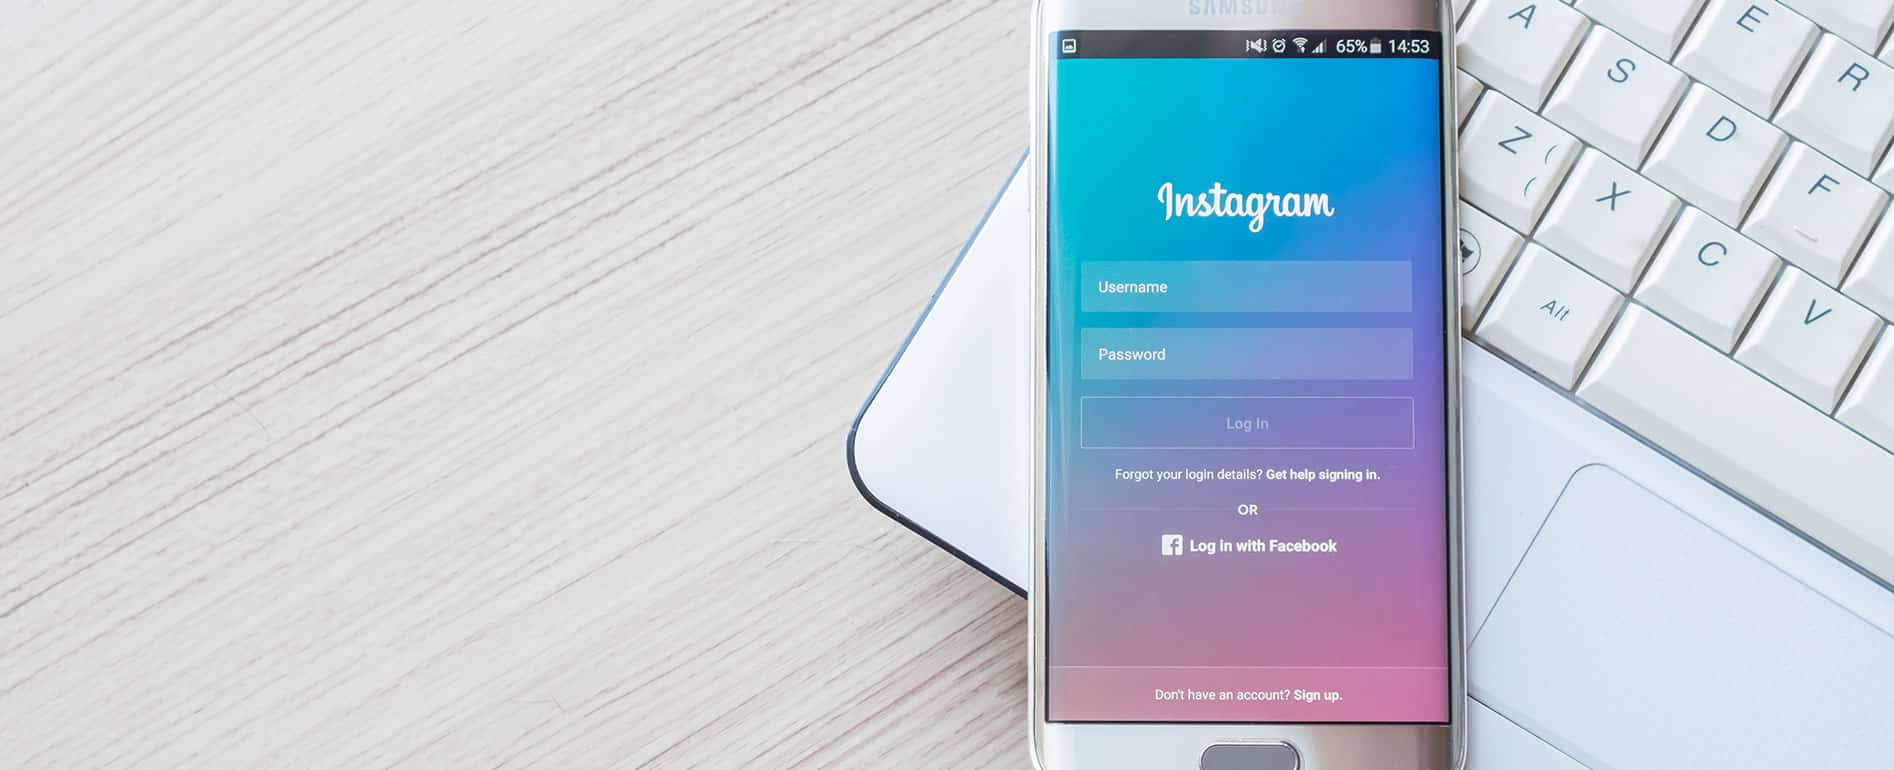 5 Reasons You Need Instagram for Your Business